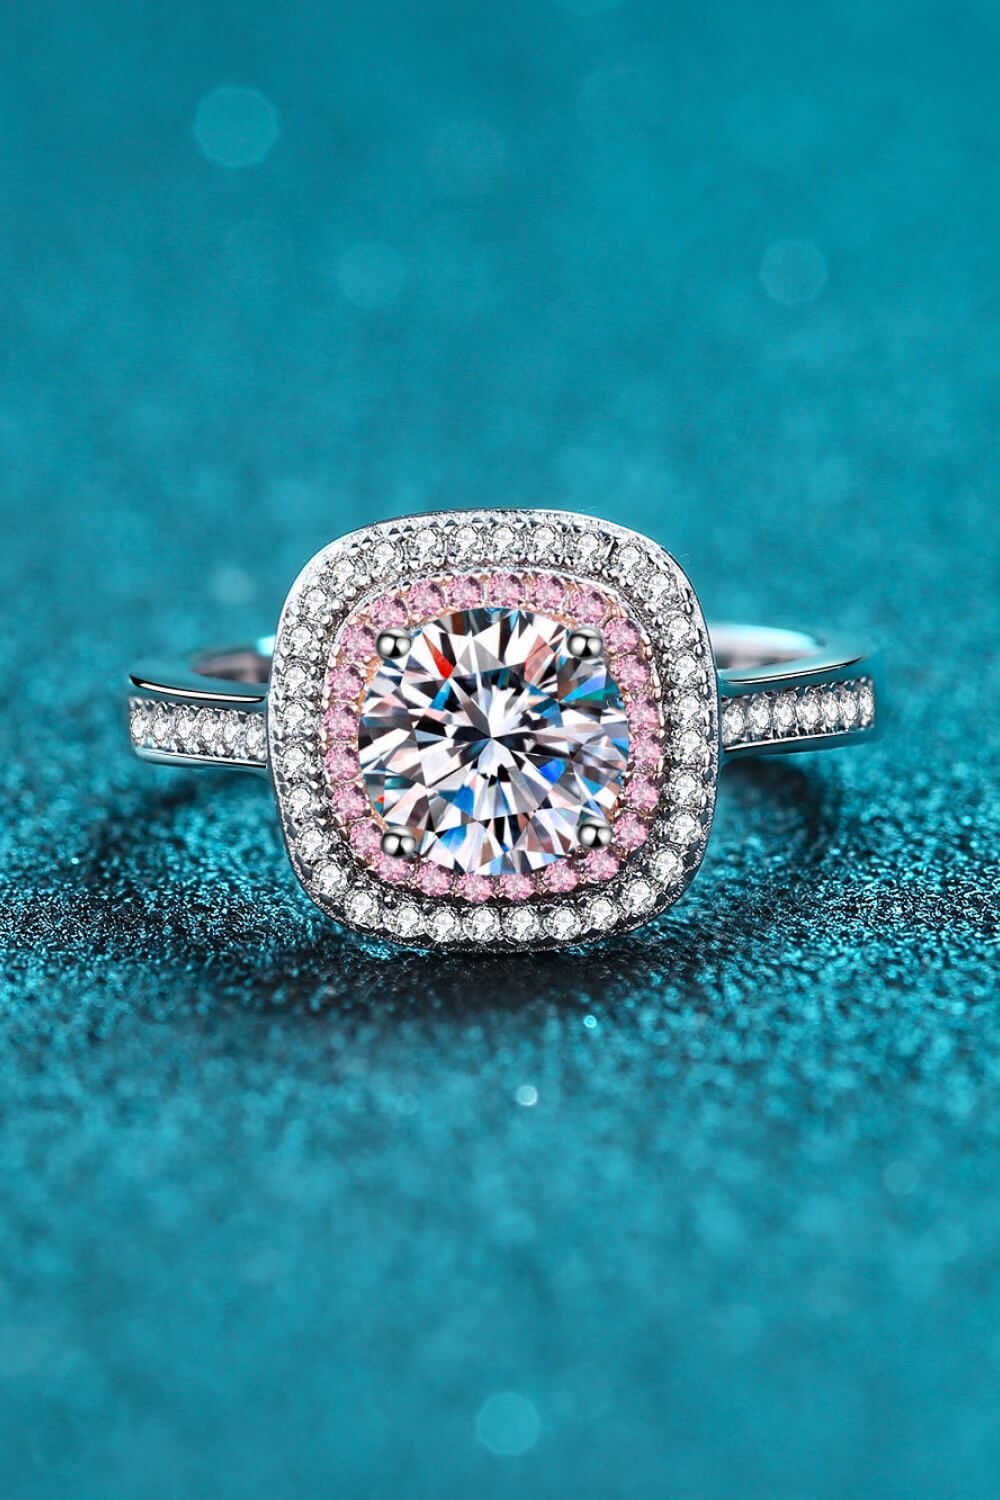 Need You Now - A Radiant Moissanite Ring for Eternal Romance and Timeless Love - Guy Christopher